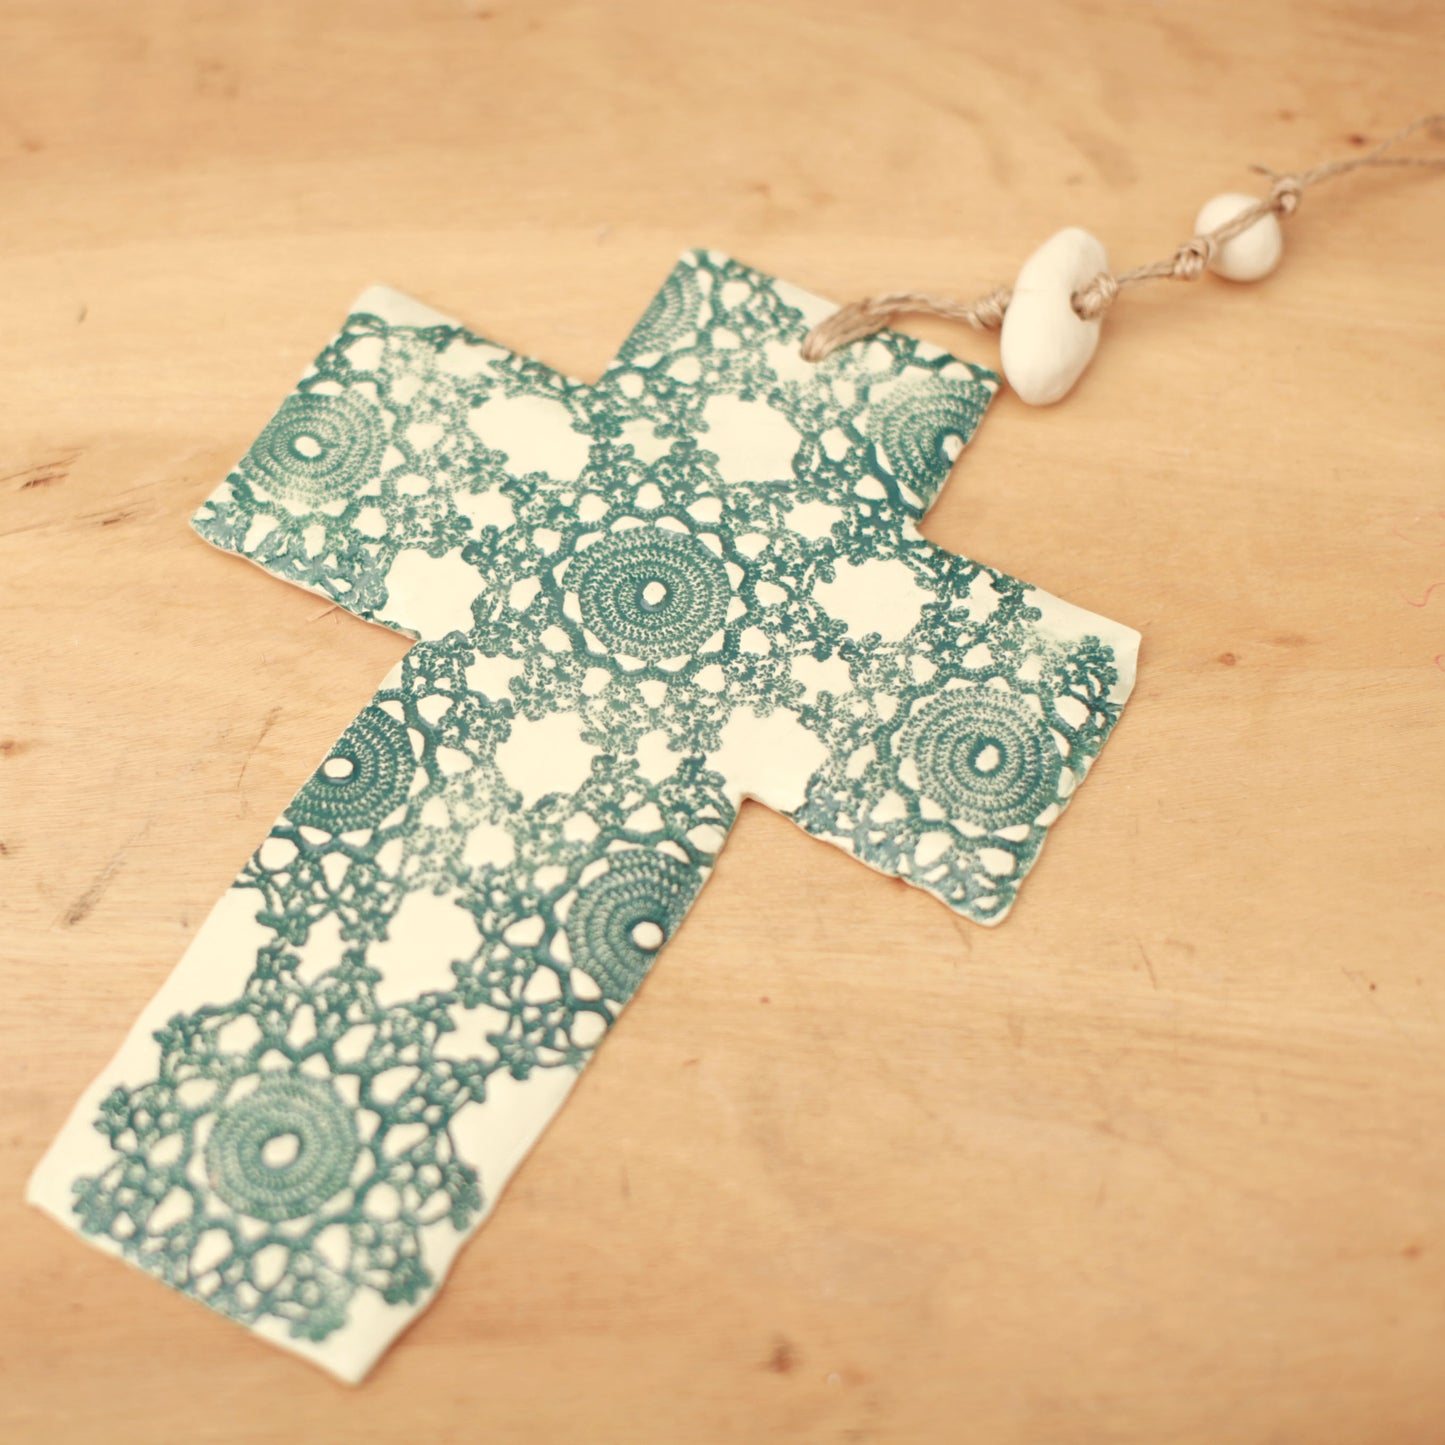 Ceramic Cross with Pressed Lace Pattern